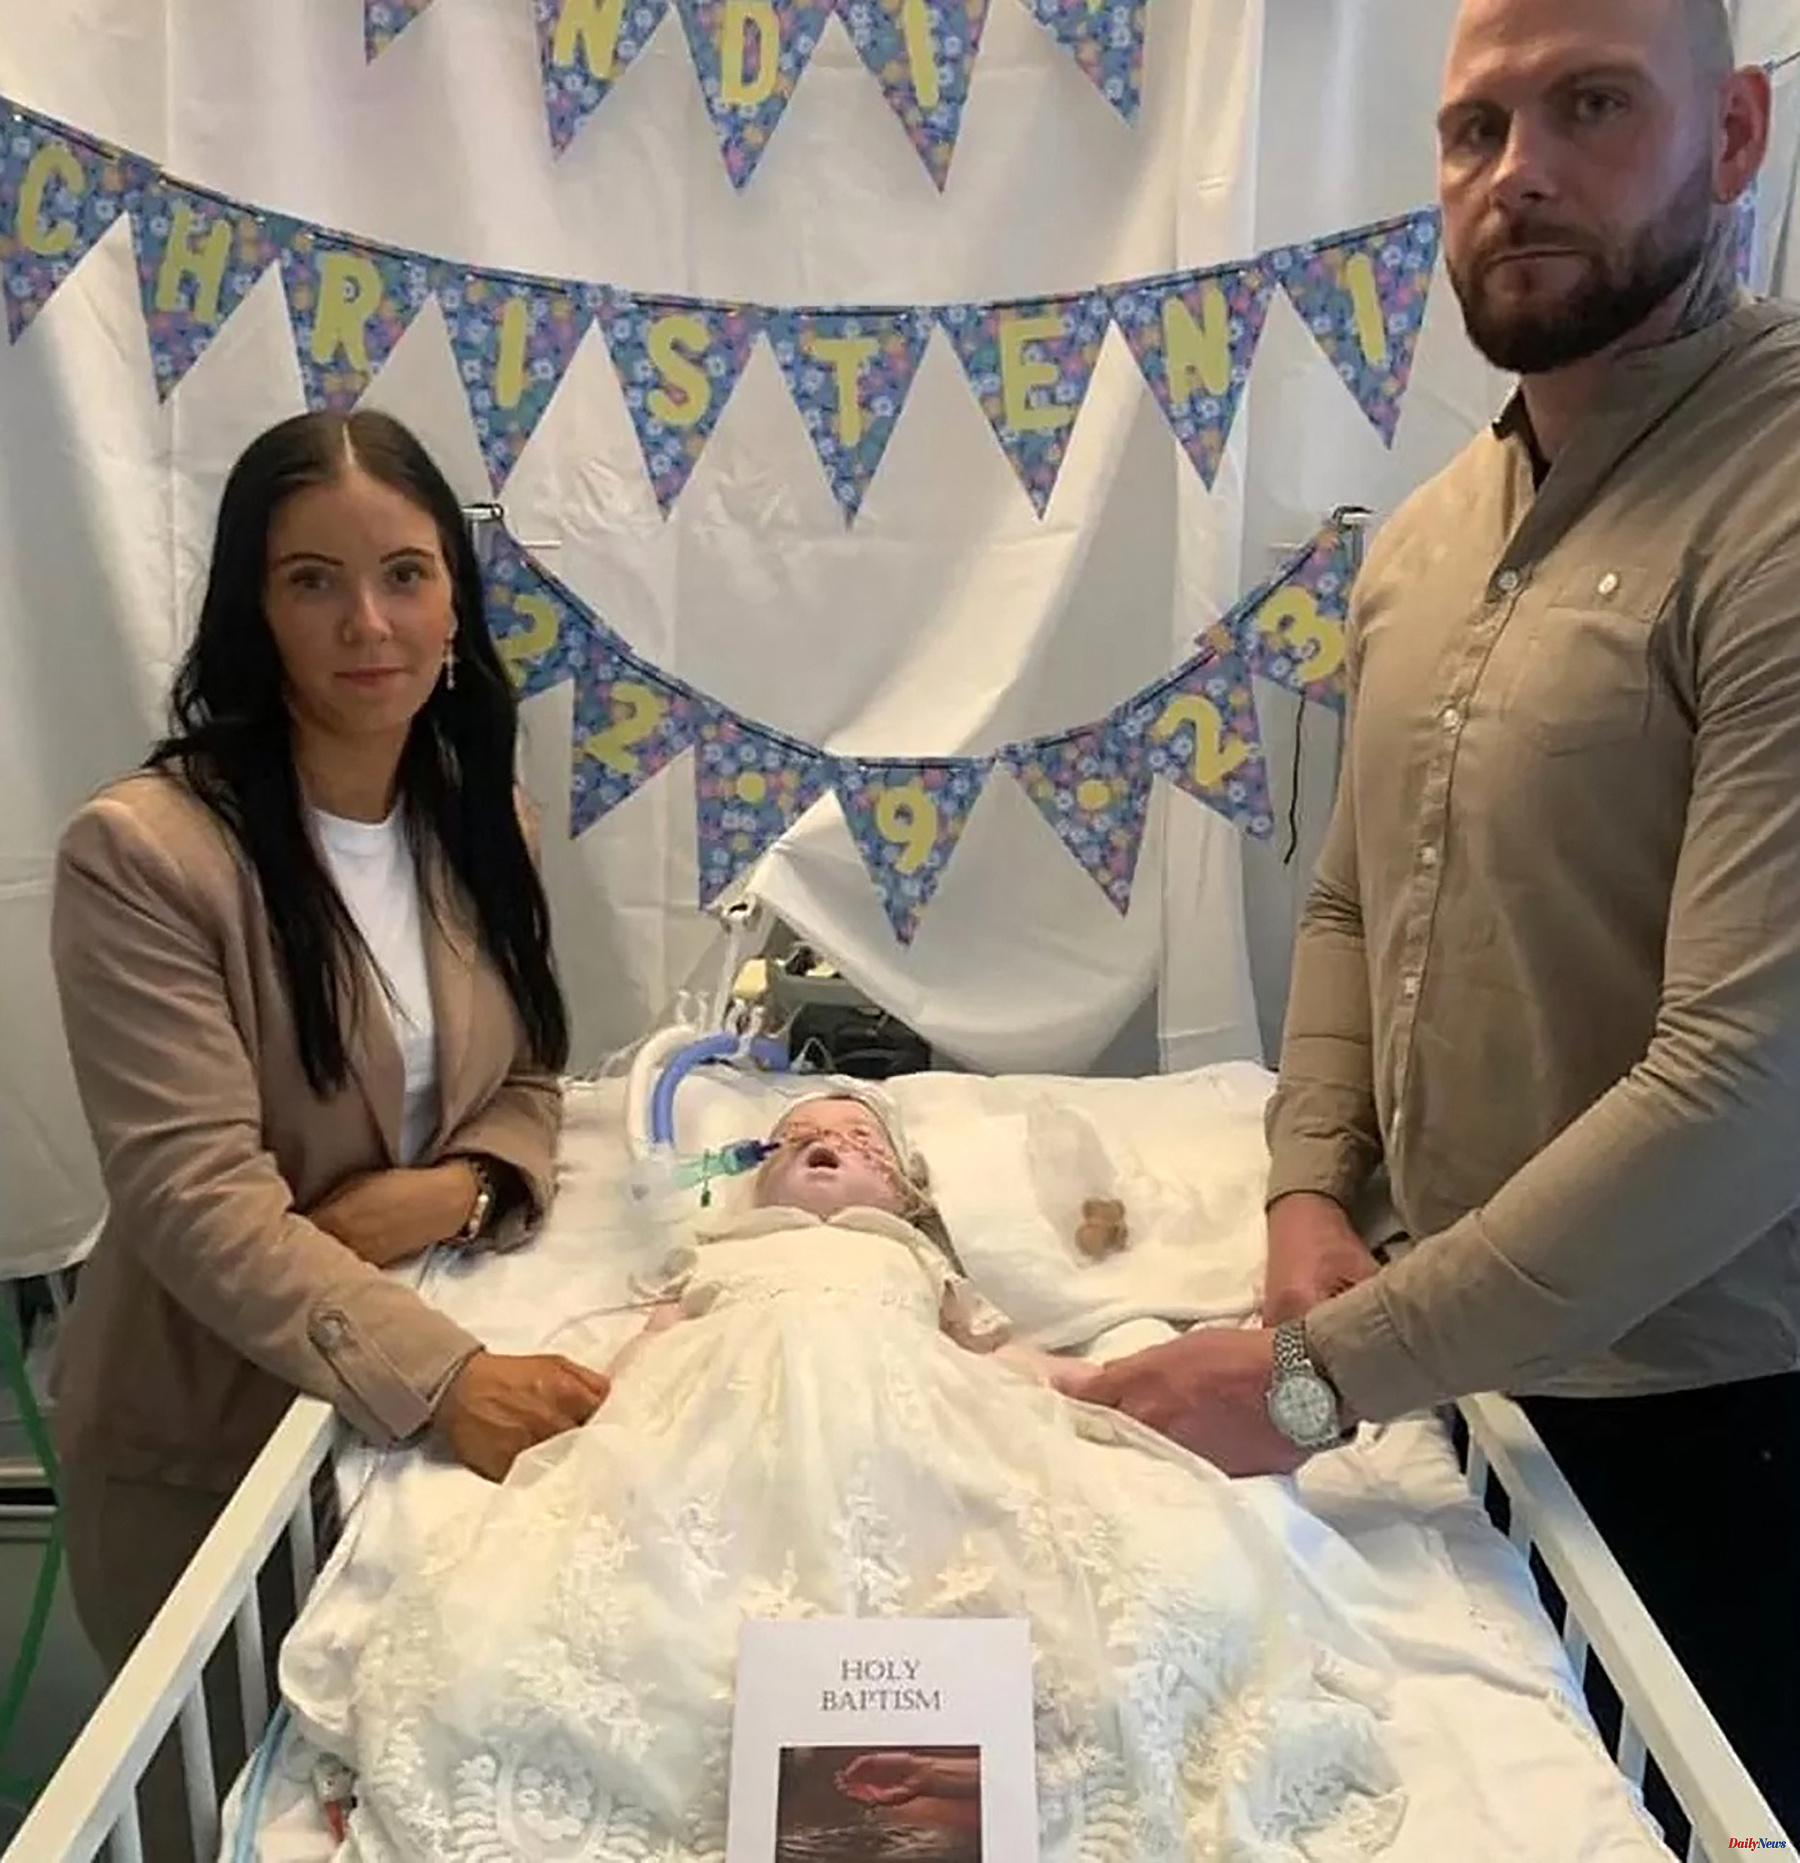 United Kingdom The Pope prays for the girl Indi Gregory, with an incurable illness and in the middle of a judicial fight by her parents to keep her alive